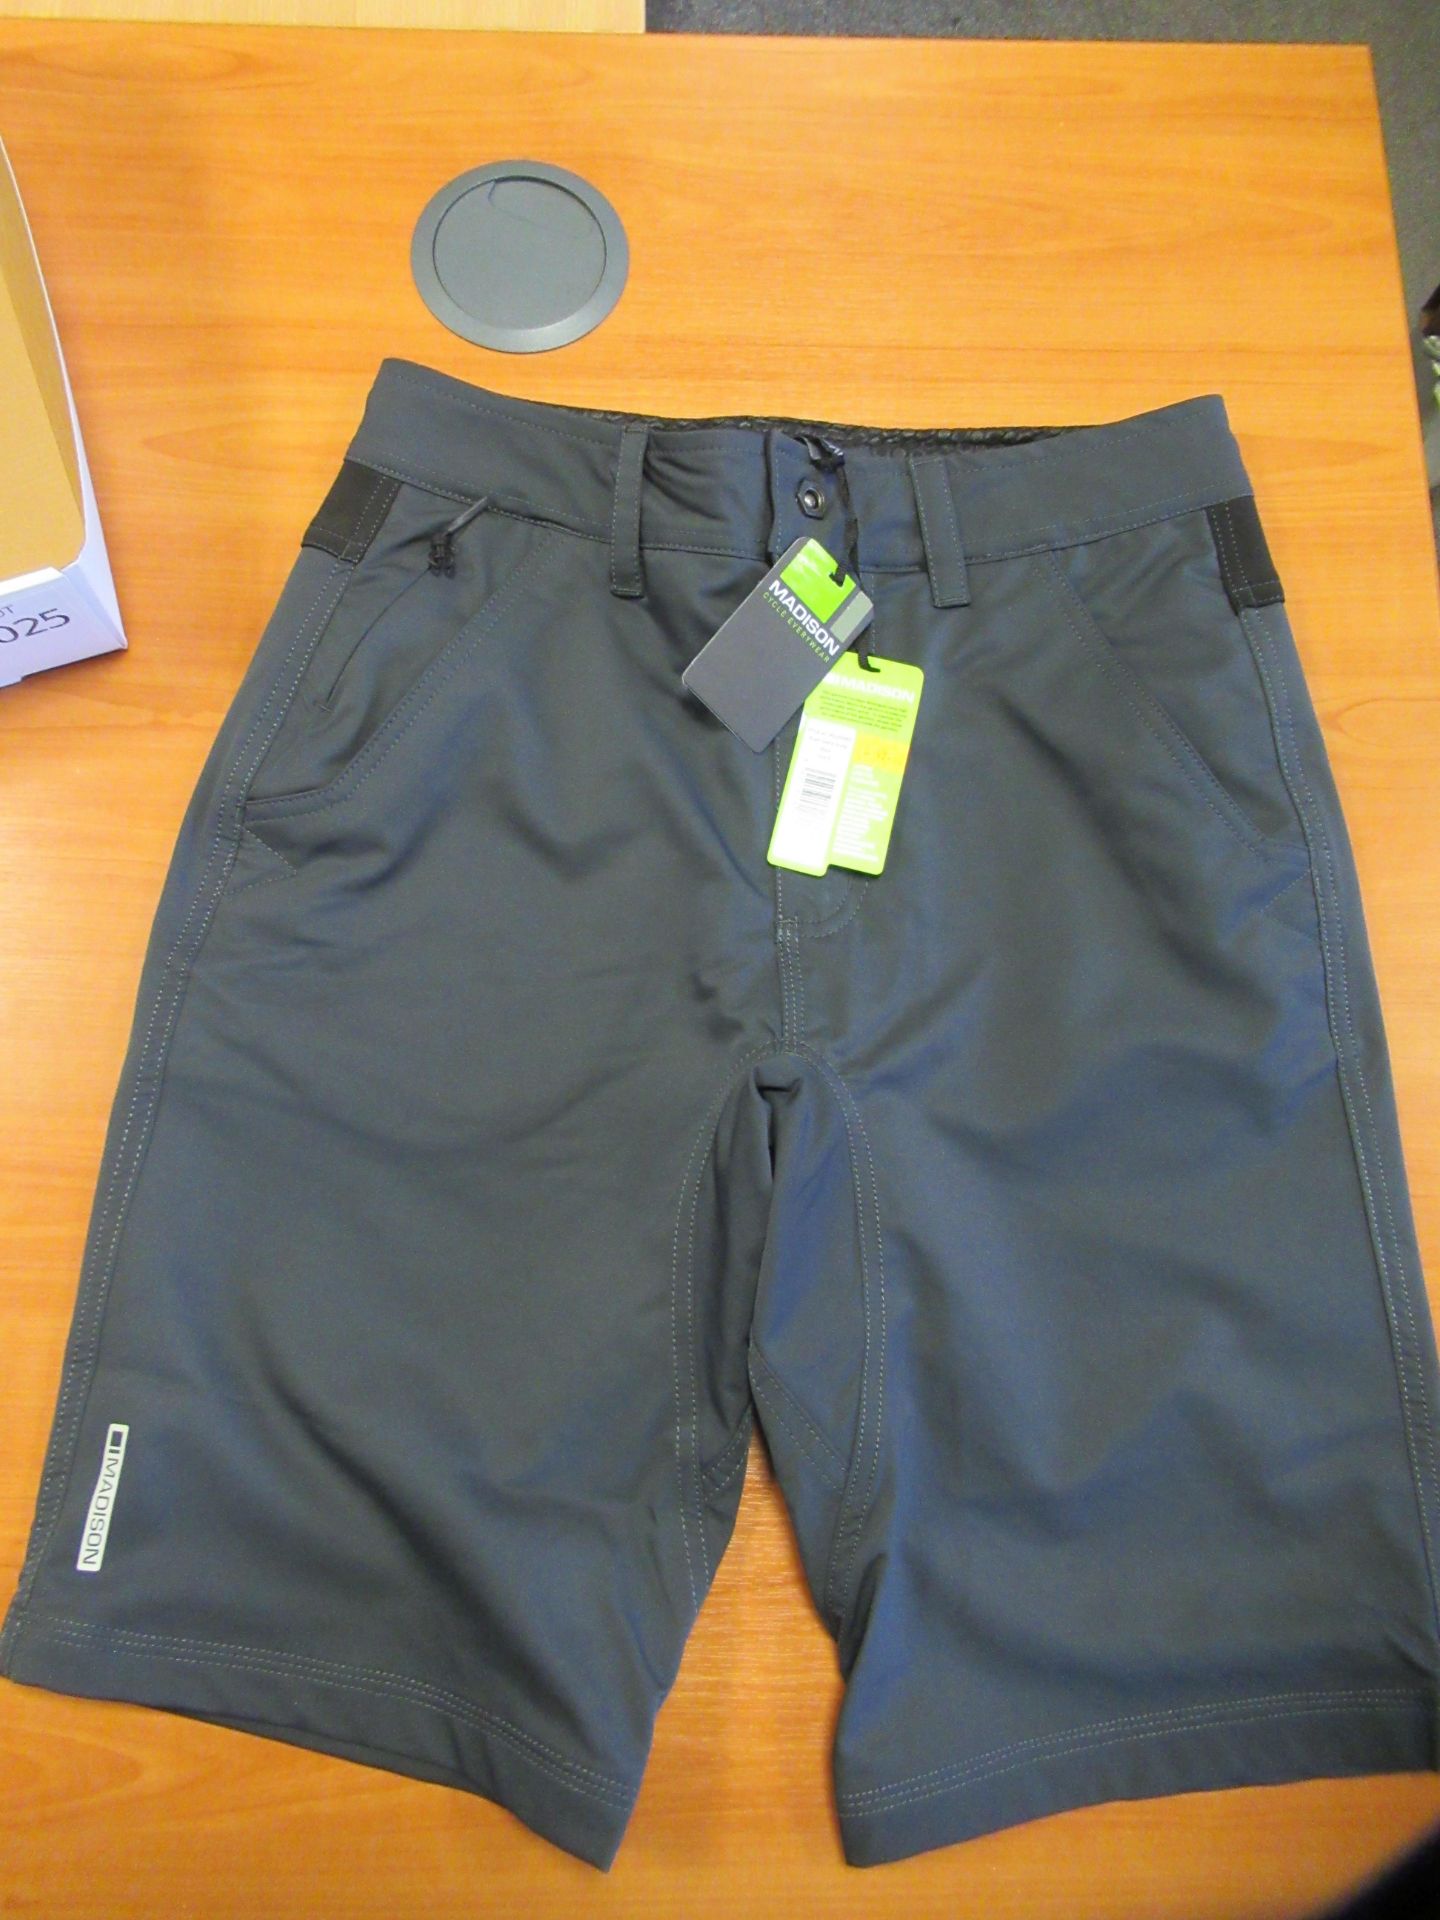 S Male Cycling Clothes - Image 5 of 5